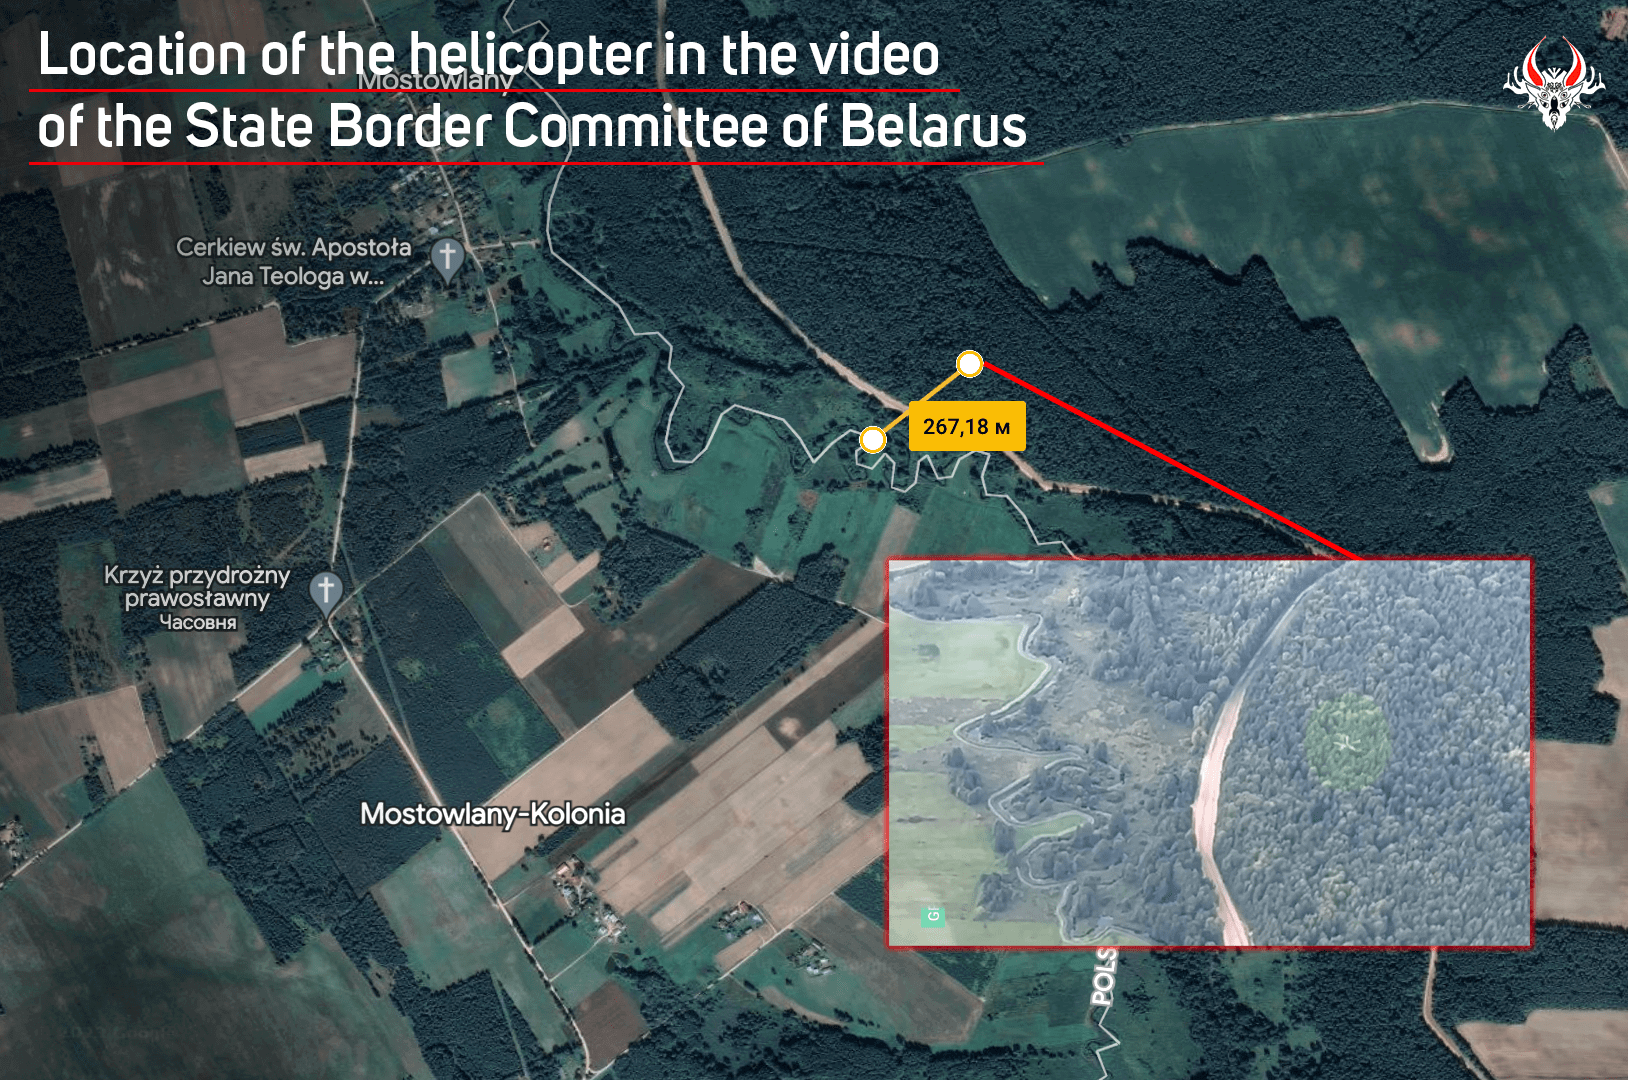 The State Border Committee of Belarus claims that a Polish helicopter violated the Belarus-Poland border